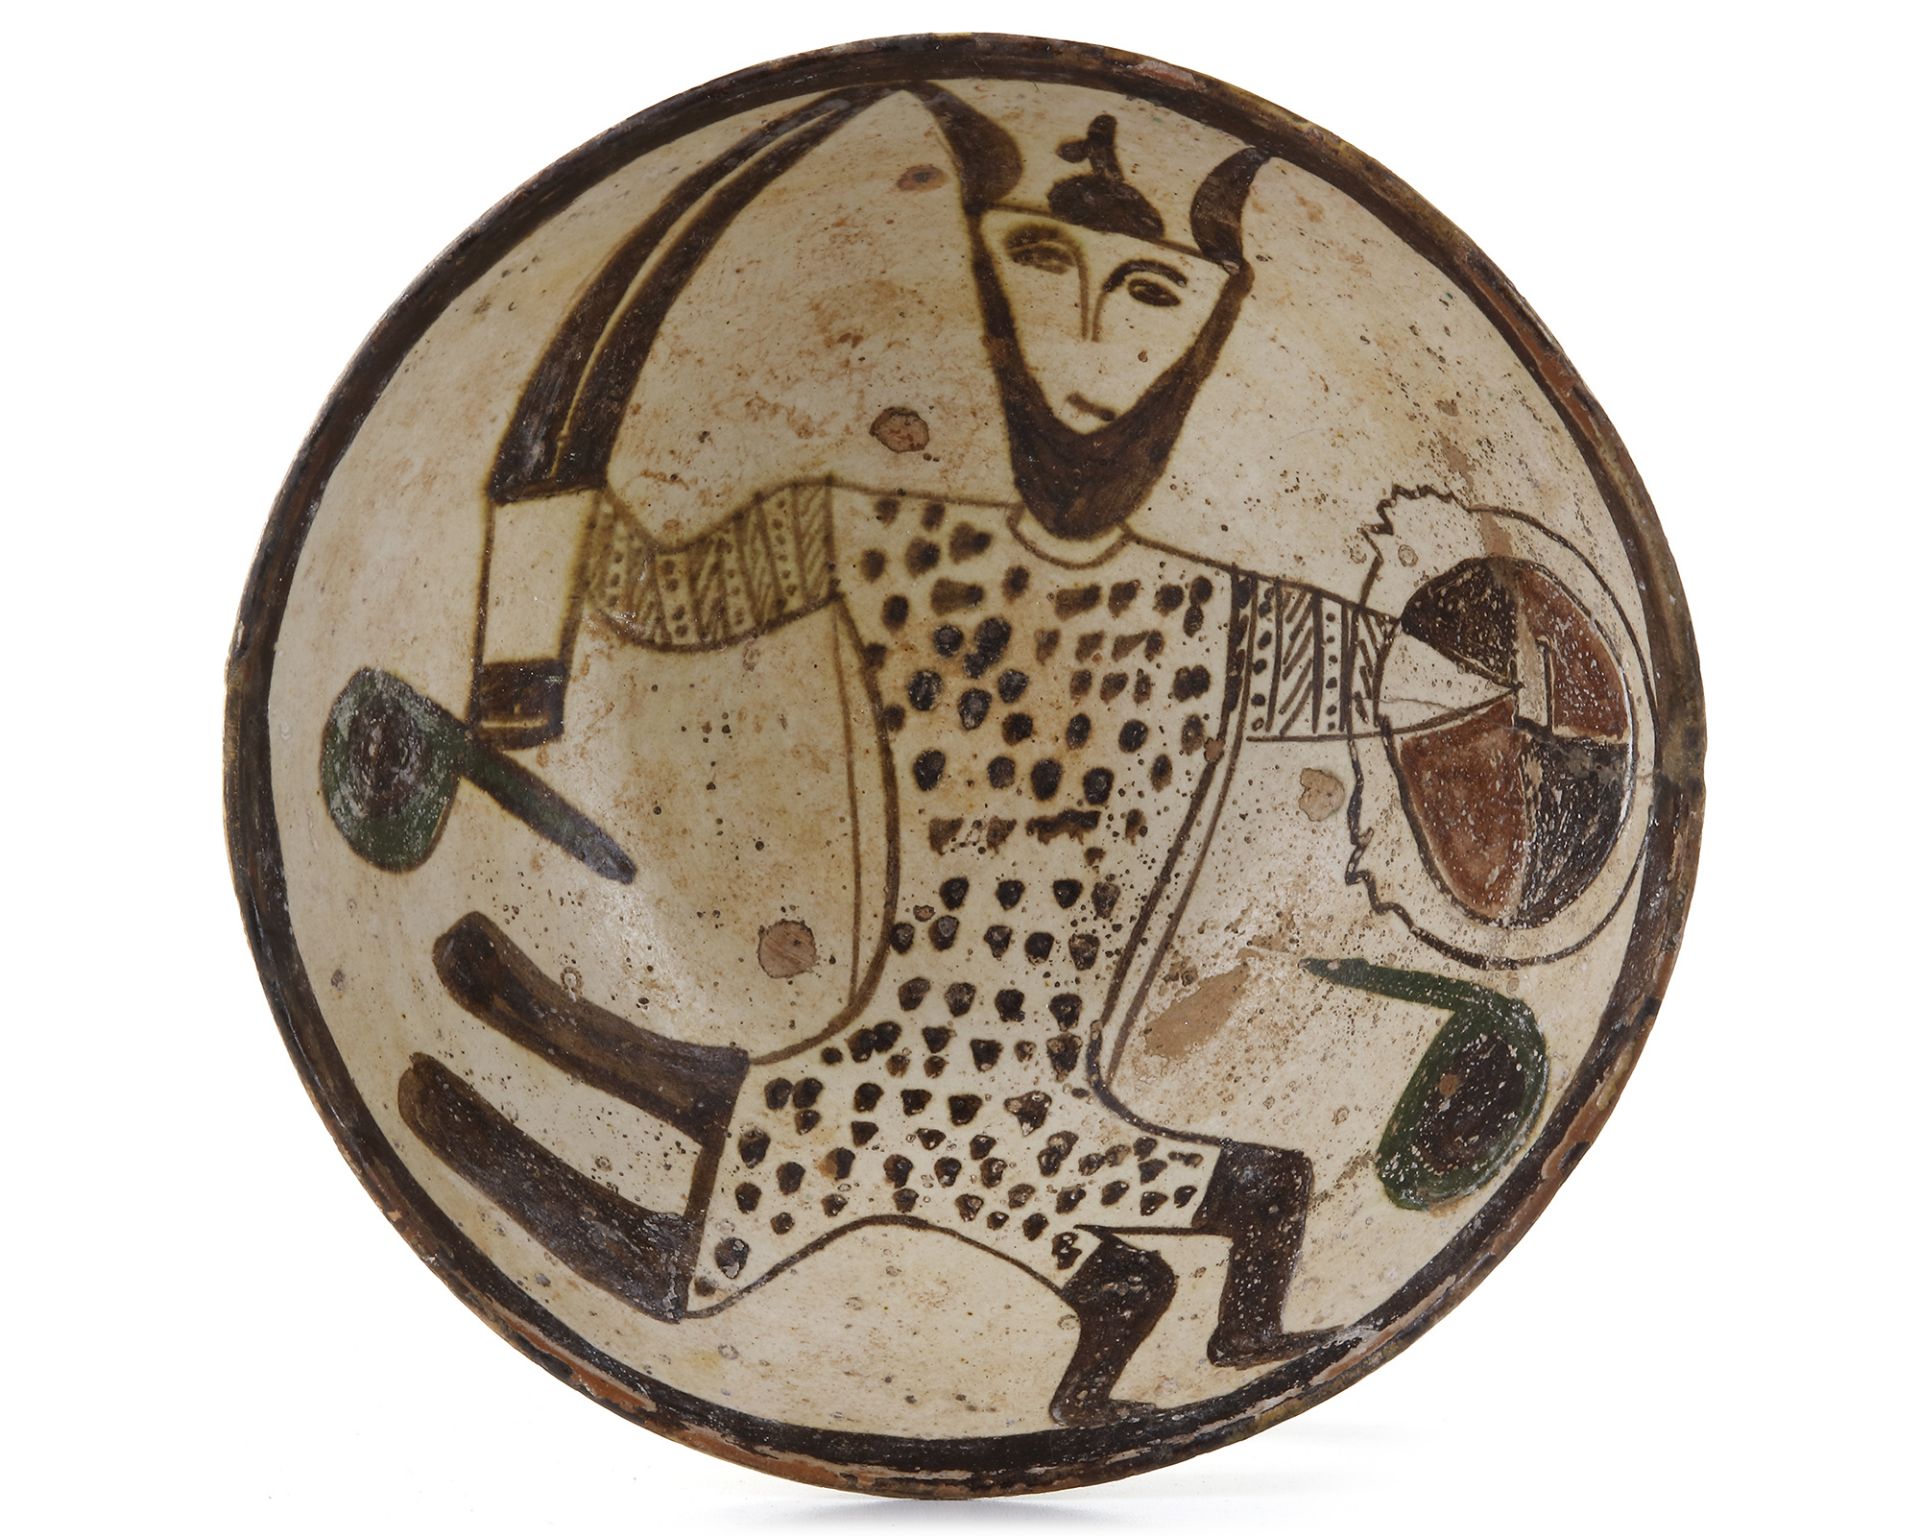 A NISHAPUR FIGURAL BUFFWARE POTTERY BOWL DEPICTING A WARRIOR, PERSIA, 10TH CENTURY - Image 2 of 8